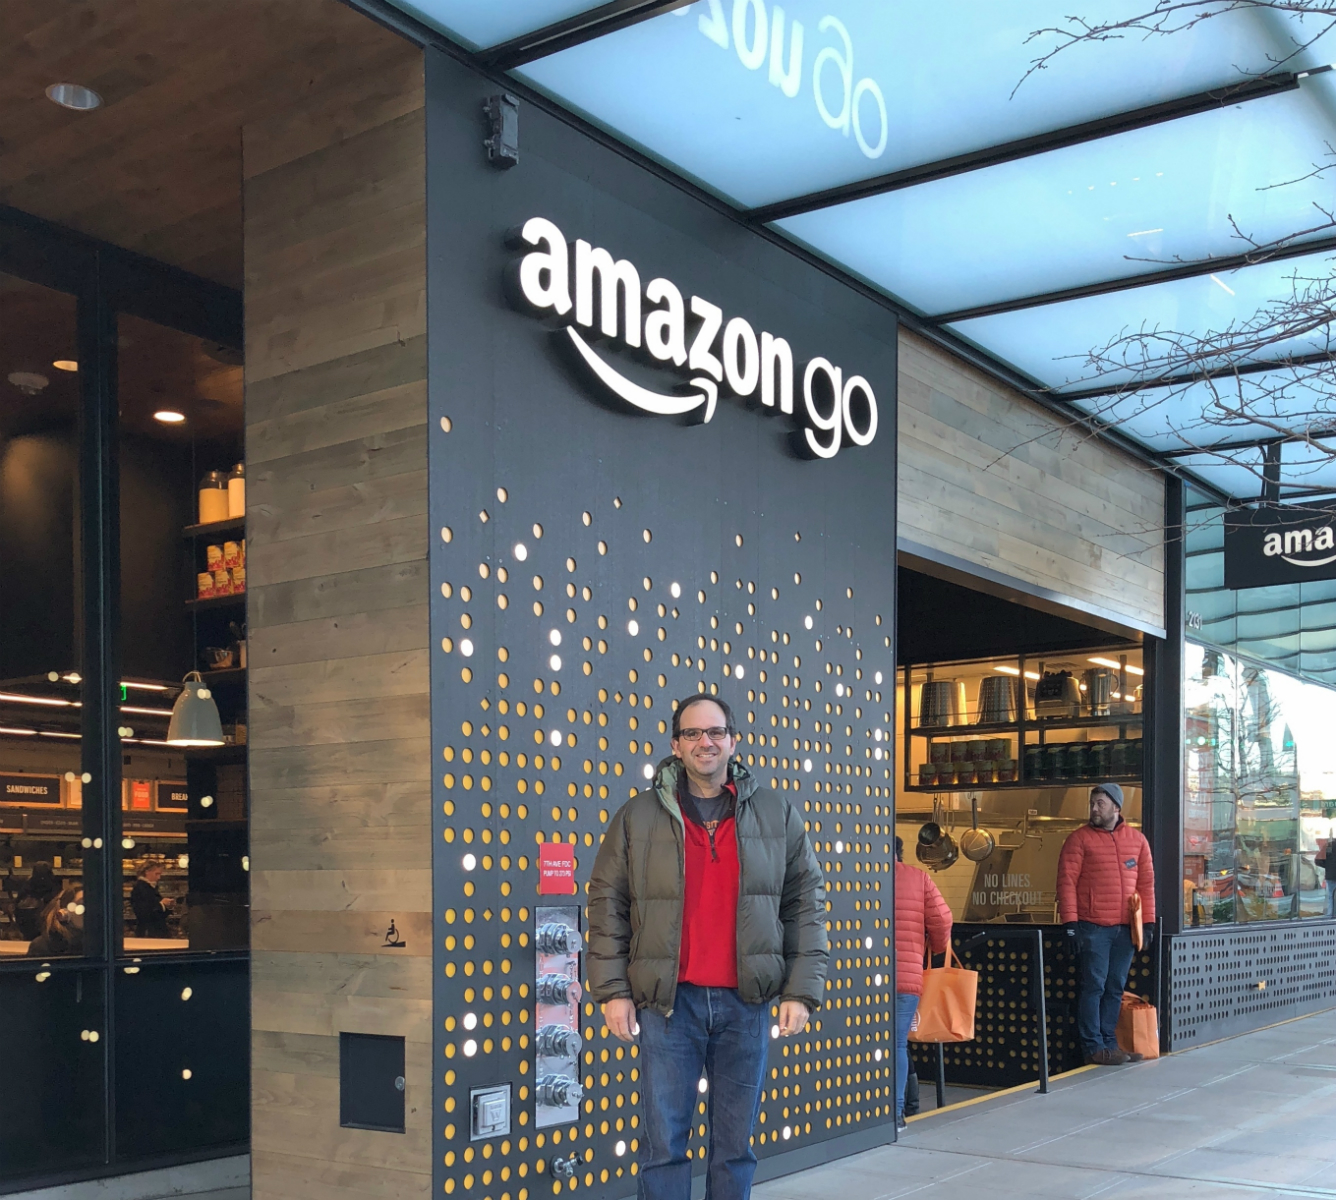 5 Takeaways from My Visit to the Amazon Go Store